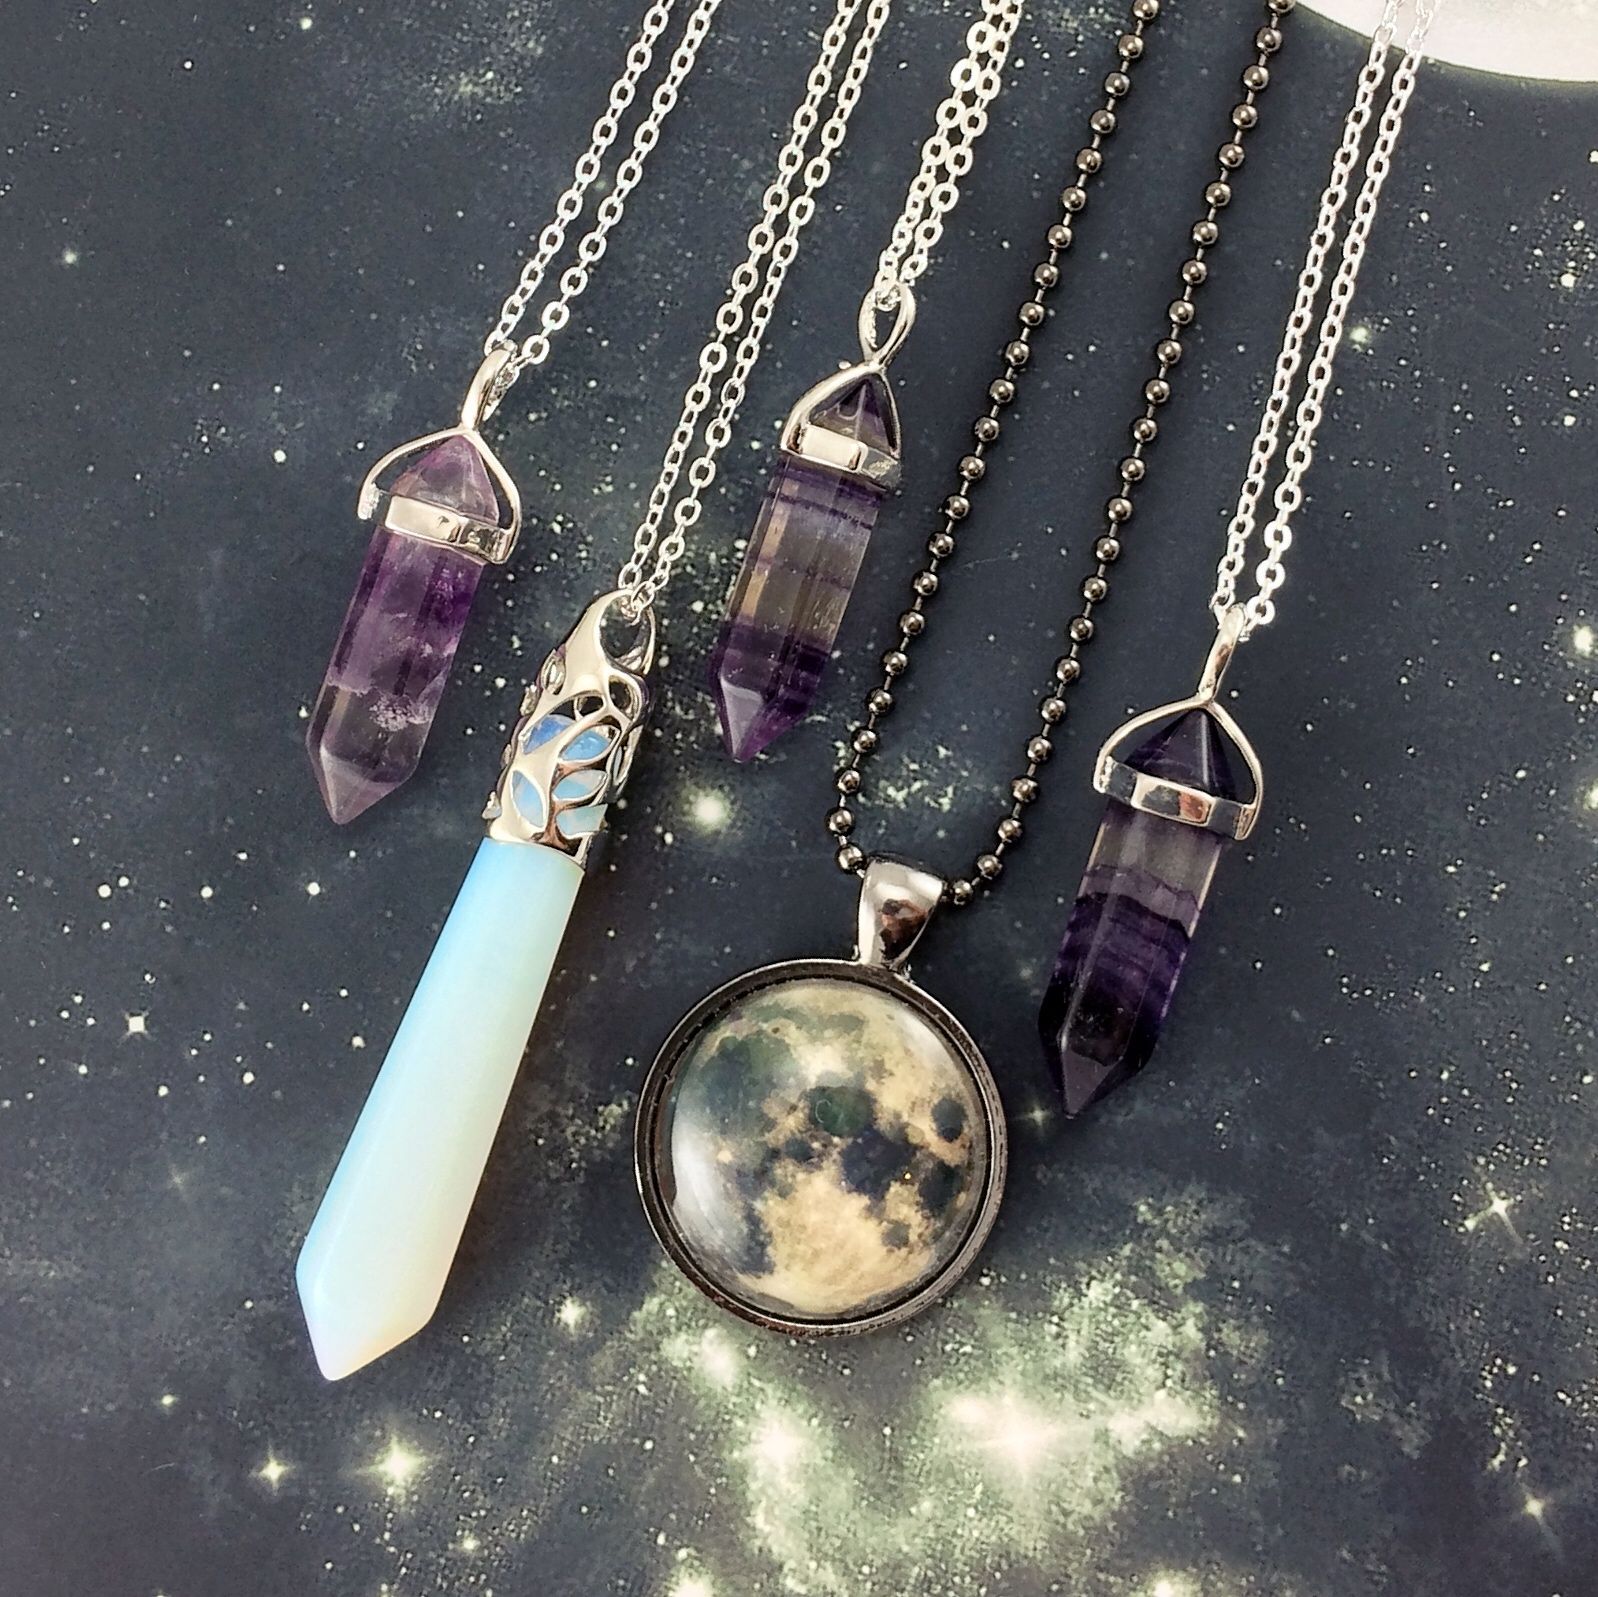 Fluorite Necklaces, Opalite Pendant, and Handmade Moon Jewelry ...